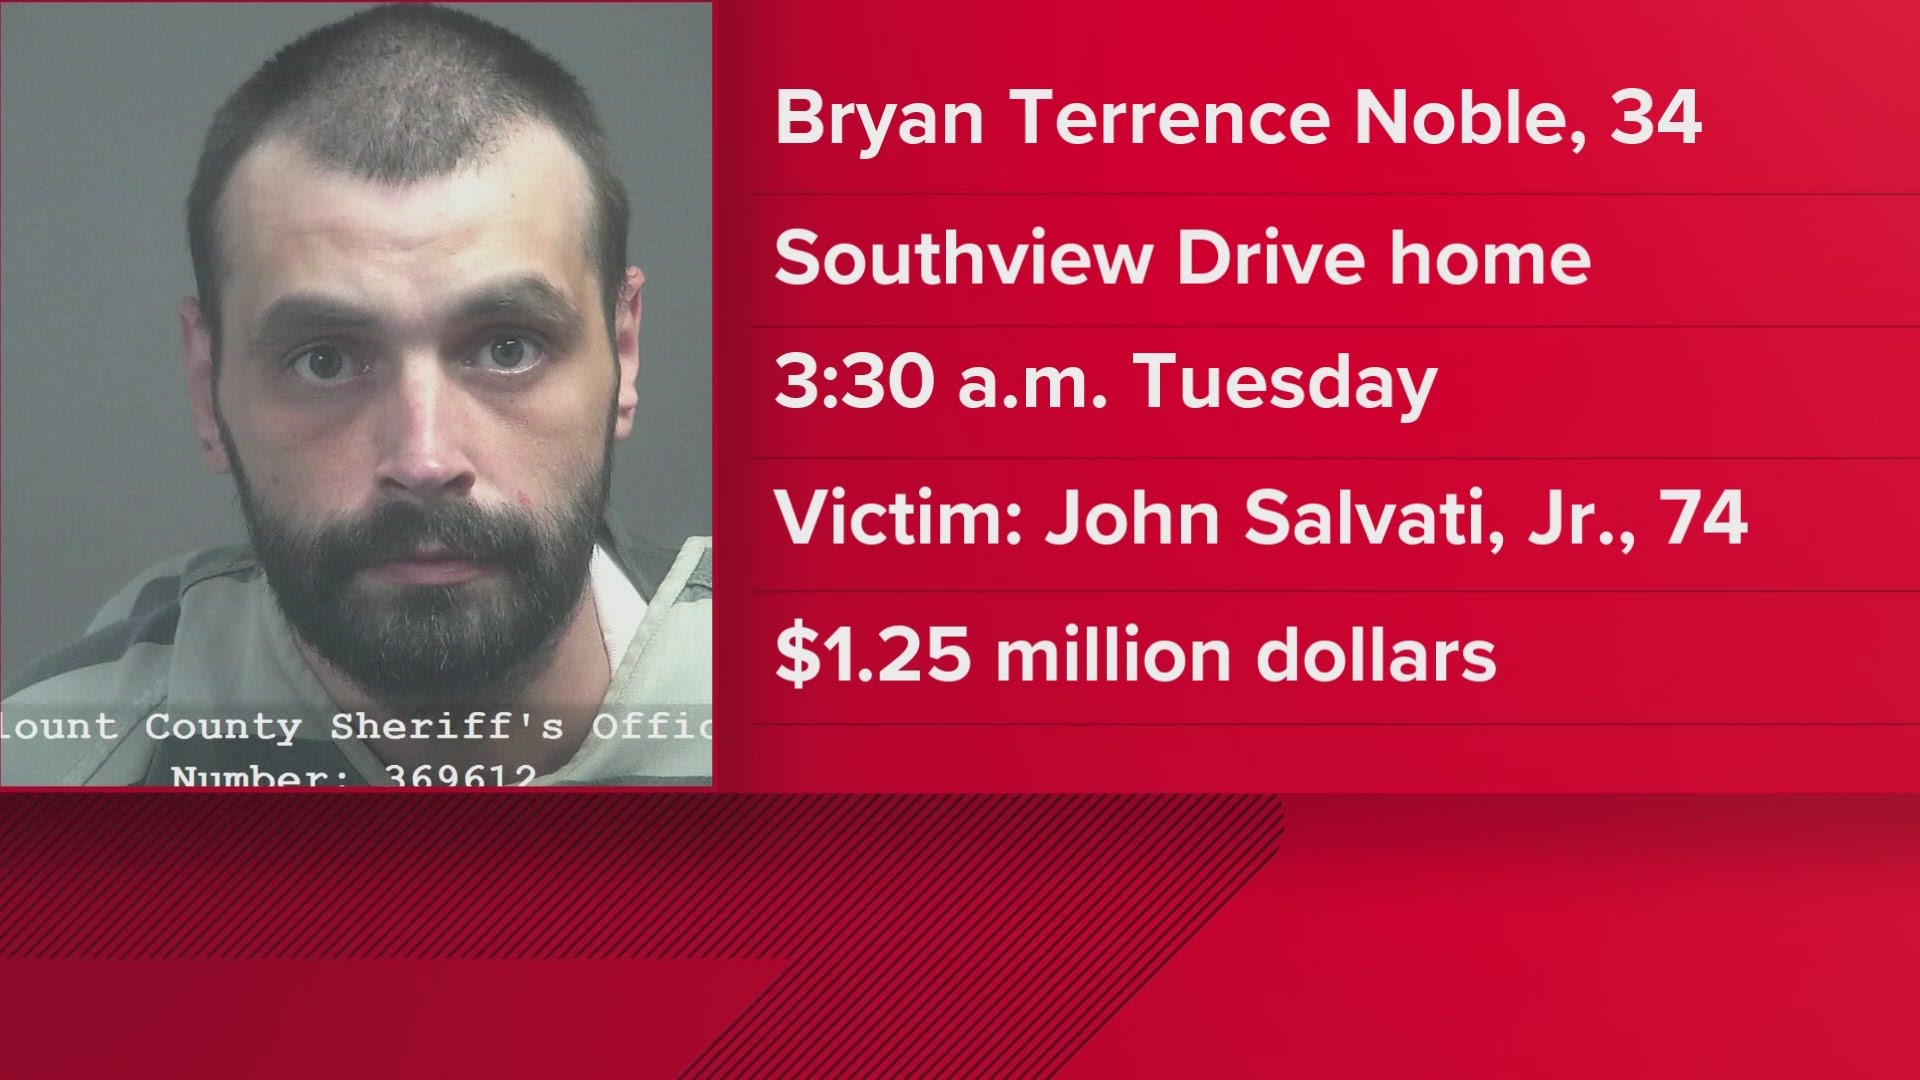 Officials said Bryan Noble stabbed 74-year-old John Salvati Jr. and his son multiple times. Noble is in jail on a $1.25 million bond.